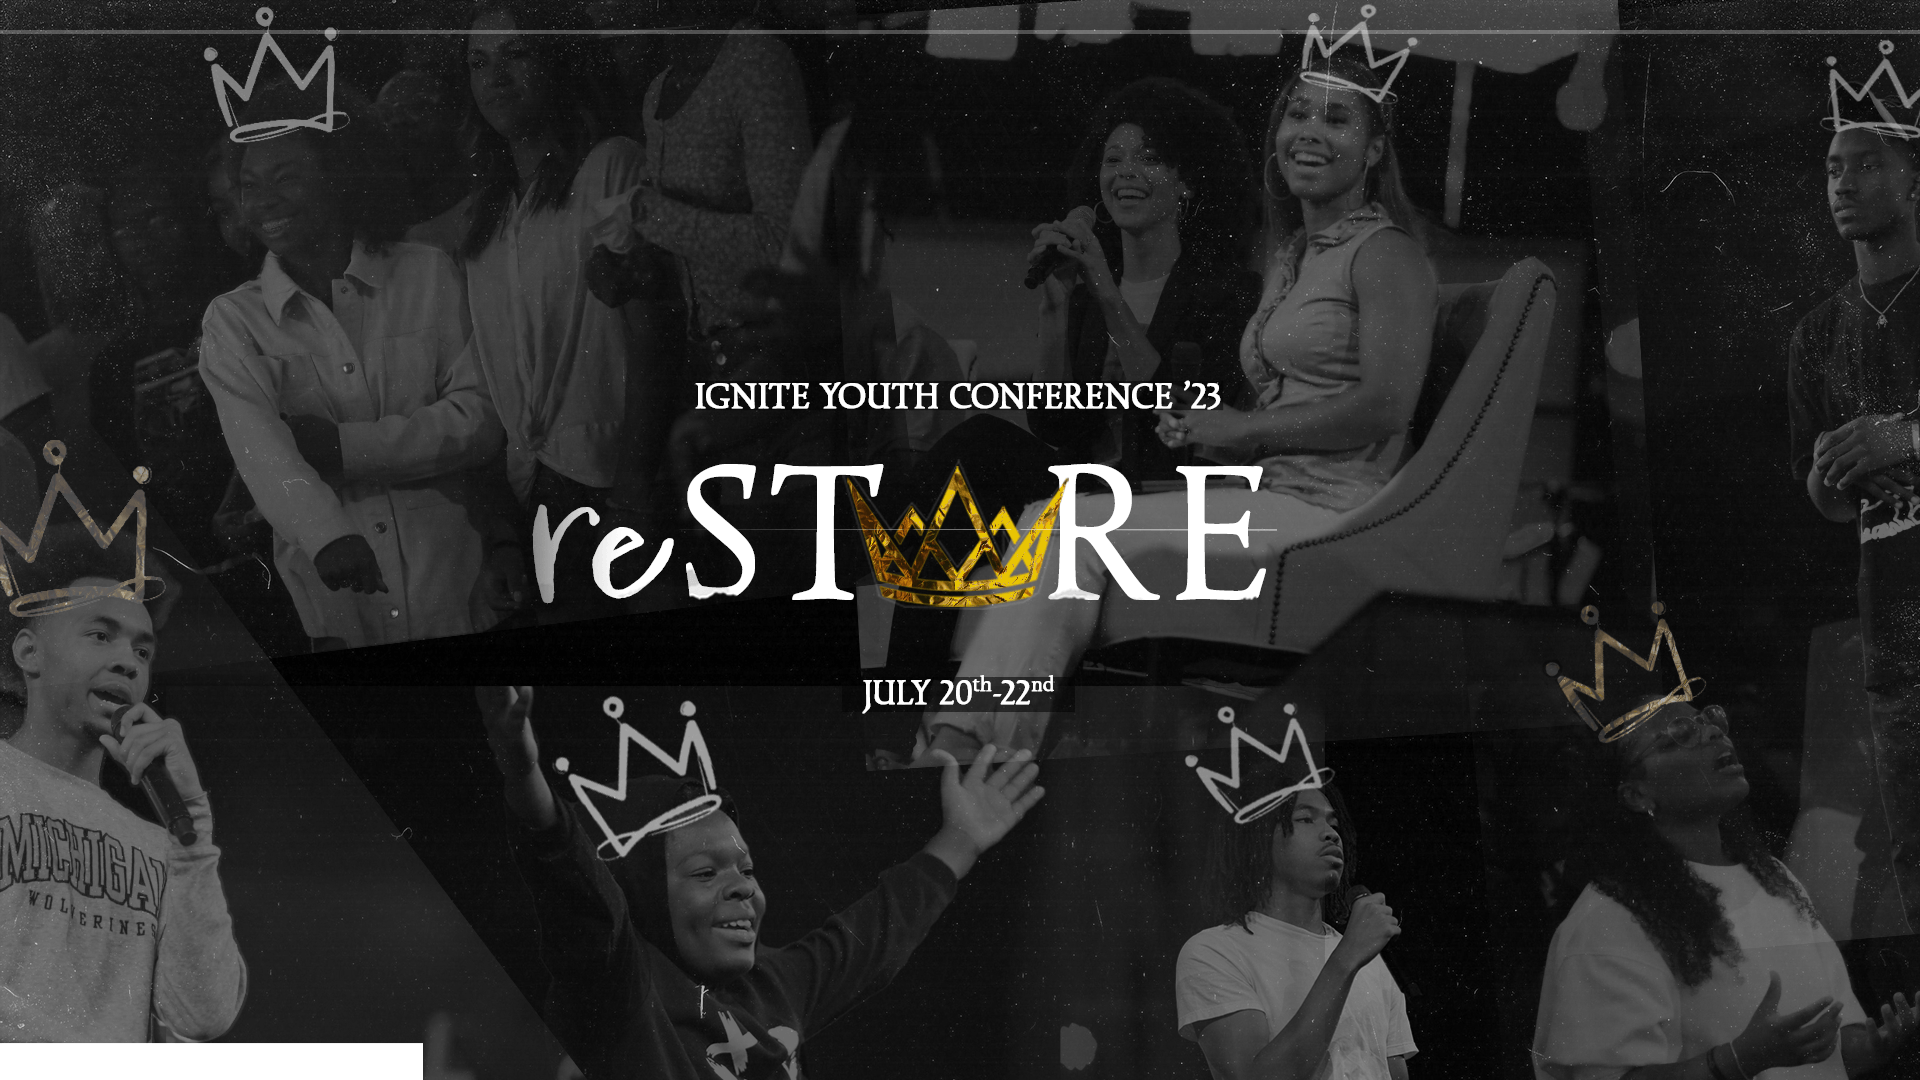 Ignite Youth Conference - Restore